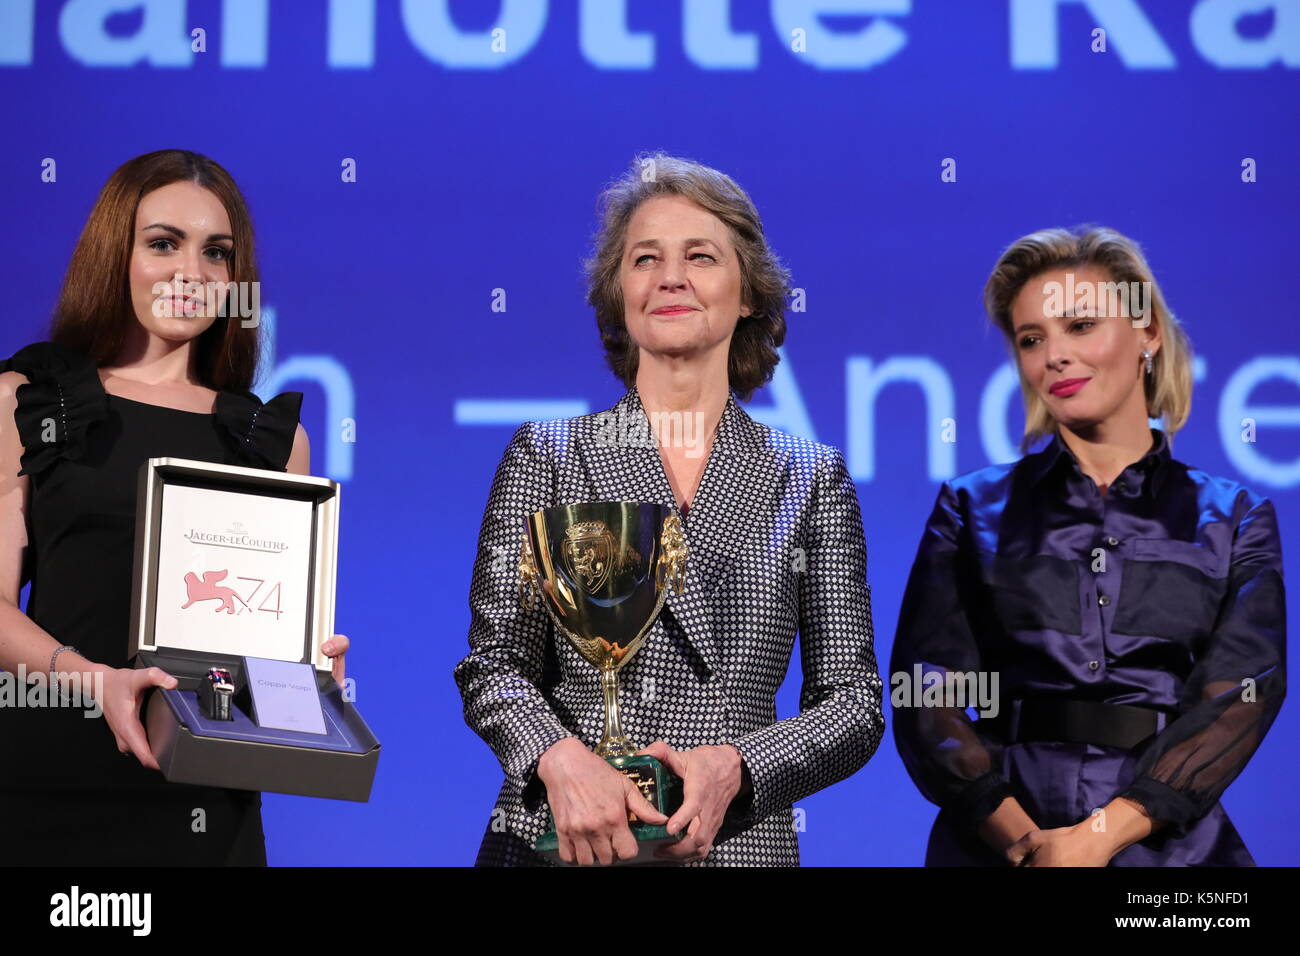 VENICE, ITALY - SEPTEMBER 09: Charlotte Rampling receives the Coppa Volpi for Best Actress Award for 'Hannah' from 'Venezia 74' jury member Jasmine Trinca (R) and a Jaeger-LeCoultre Unique engraved Reverso watch during the Award Ceremony of the 74th Venice International Film Festival at Sala Grande on September 9, 2017 in Venice, Italy. Stock Photo